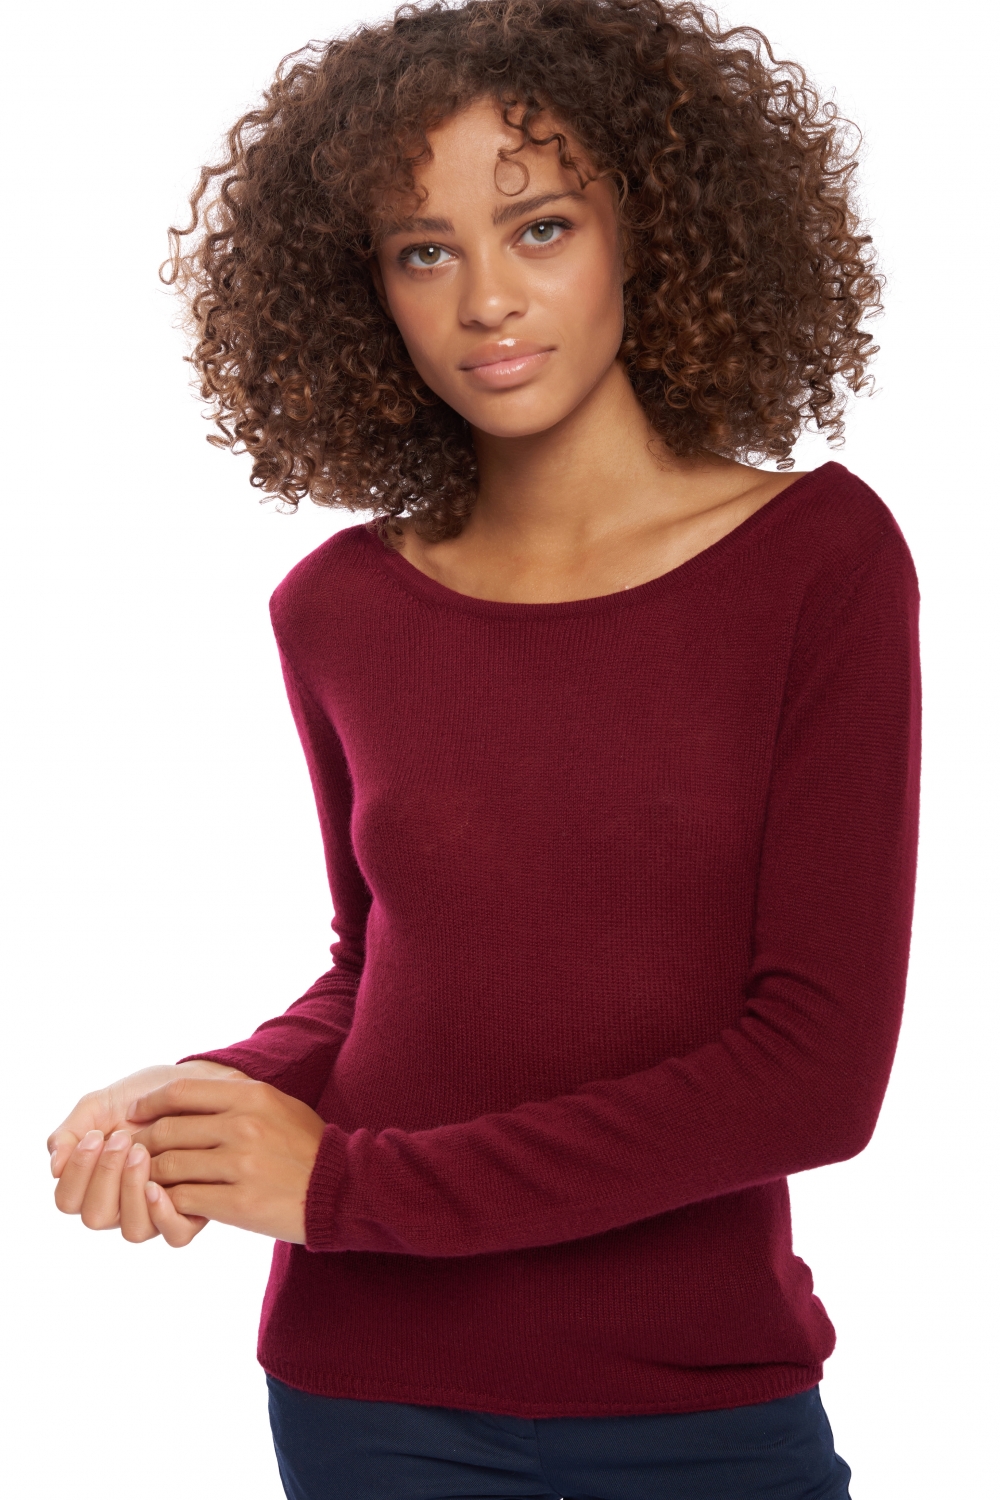 Cashmere ladies basic sweaters at low prices caleen bordeaux s